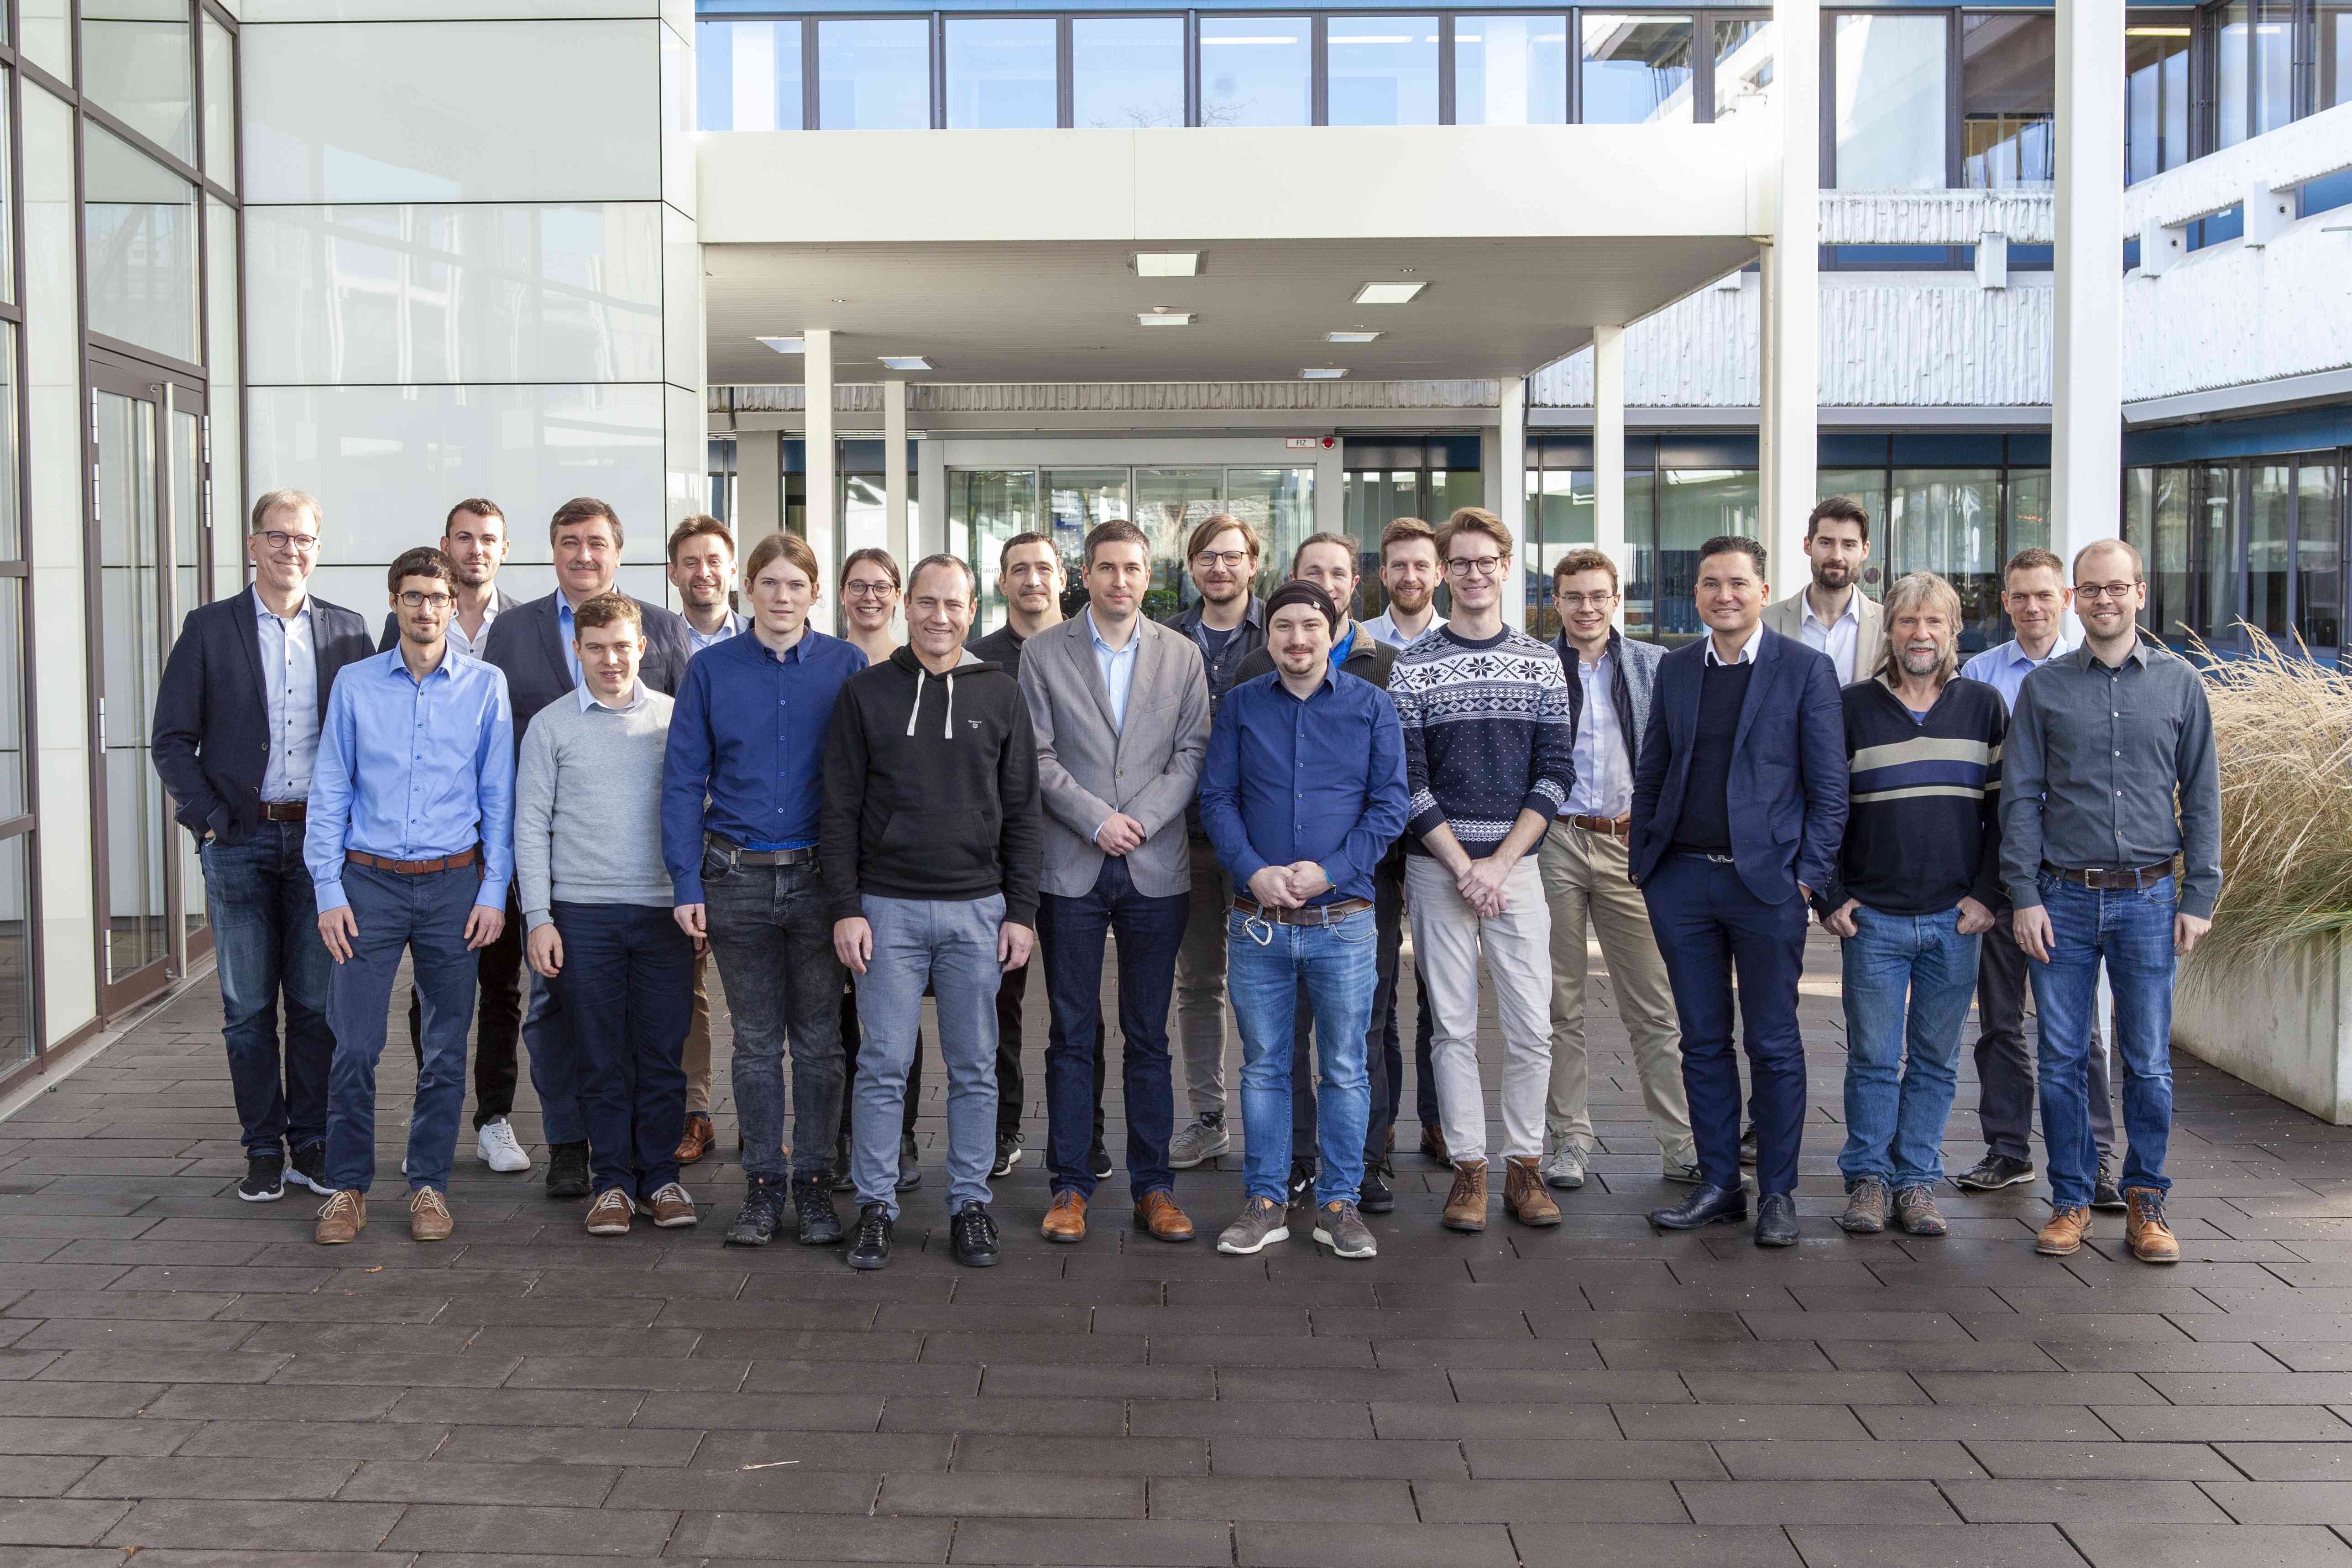 The project participants pose for the group picture in front of the main building of Fraunhofer IAF.